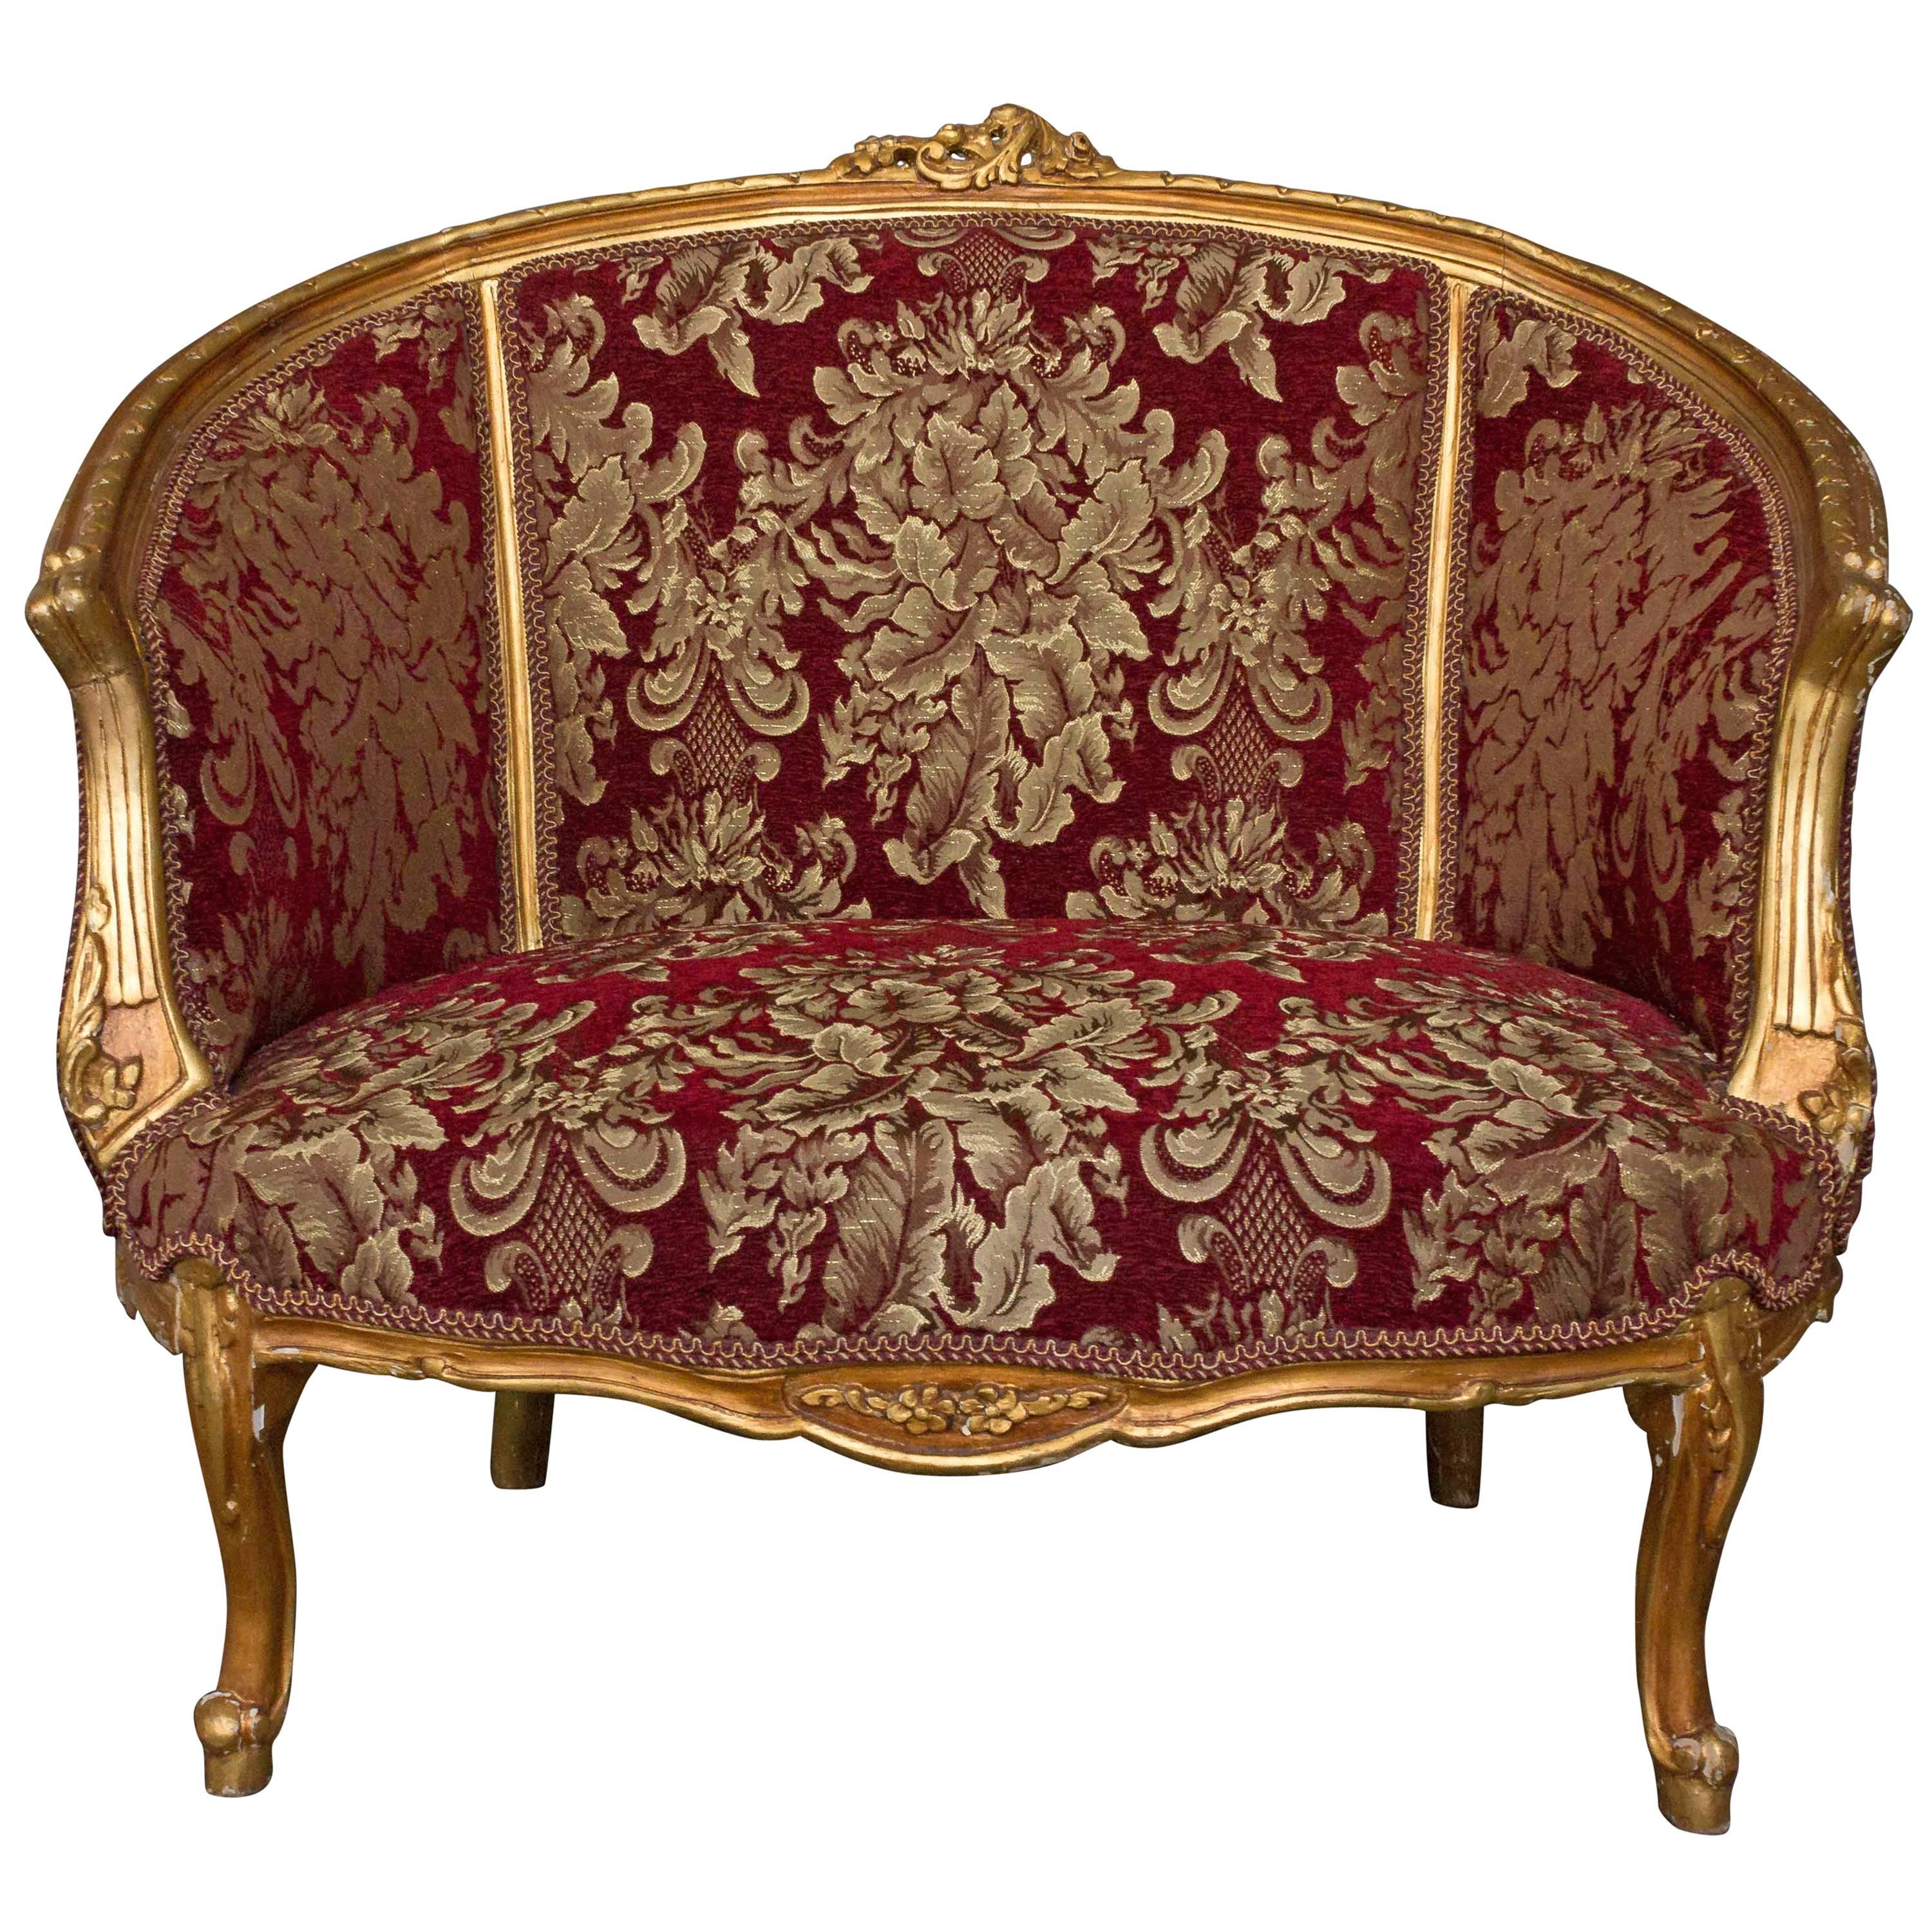 Gilt Rococo Style Marquise For Sale